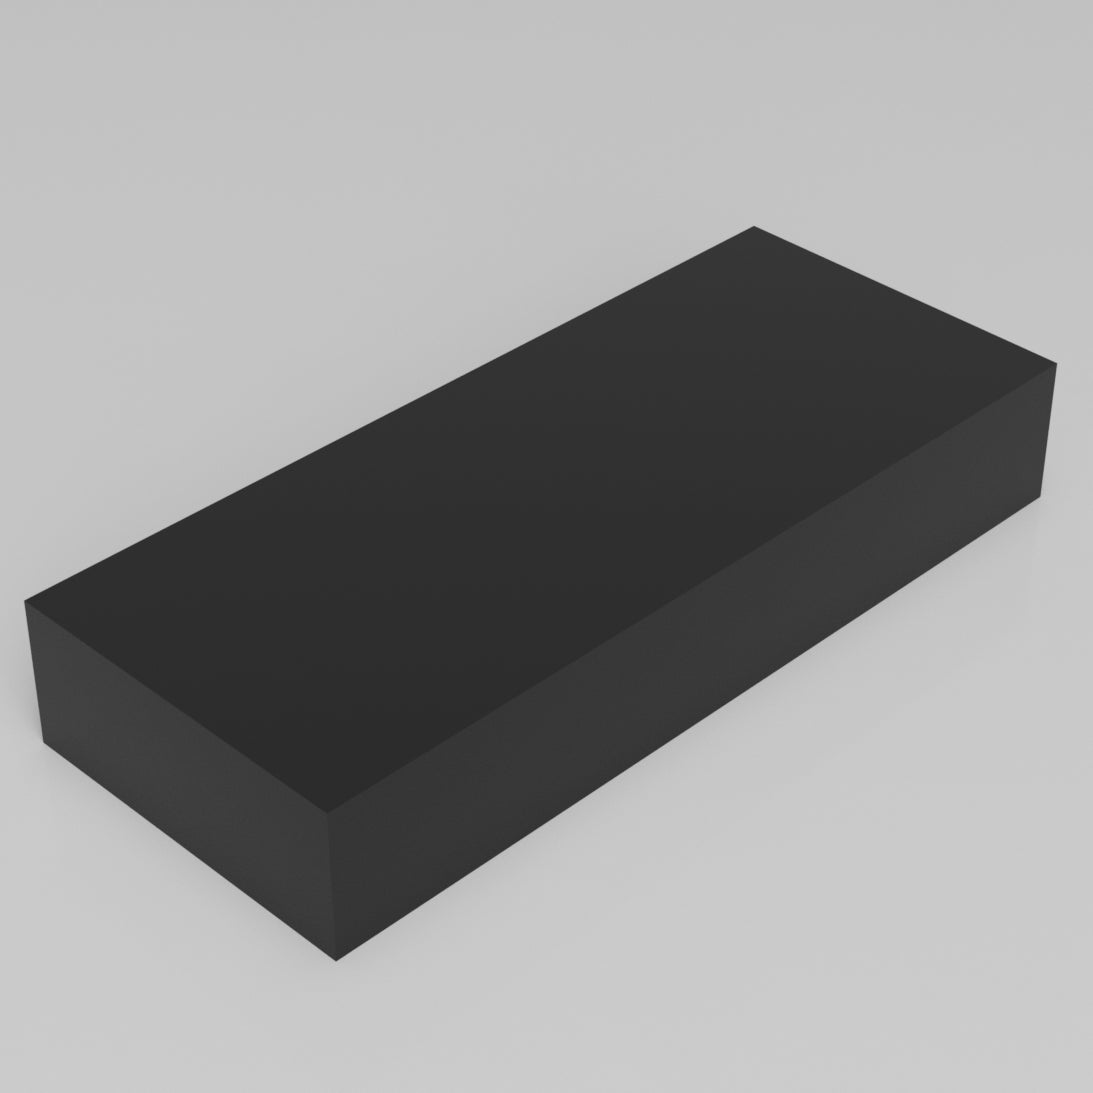 Machinable Wax Rectangular Block Front View 2 Inch by 5 Inch by 12 Inch